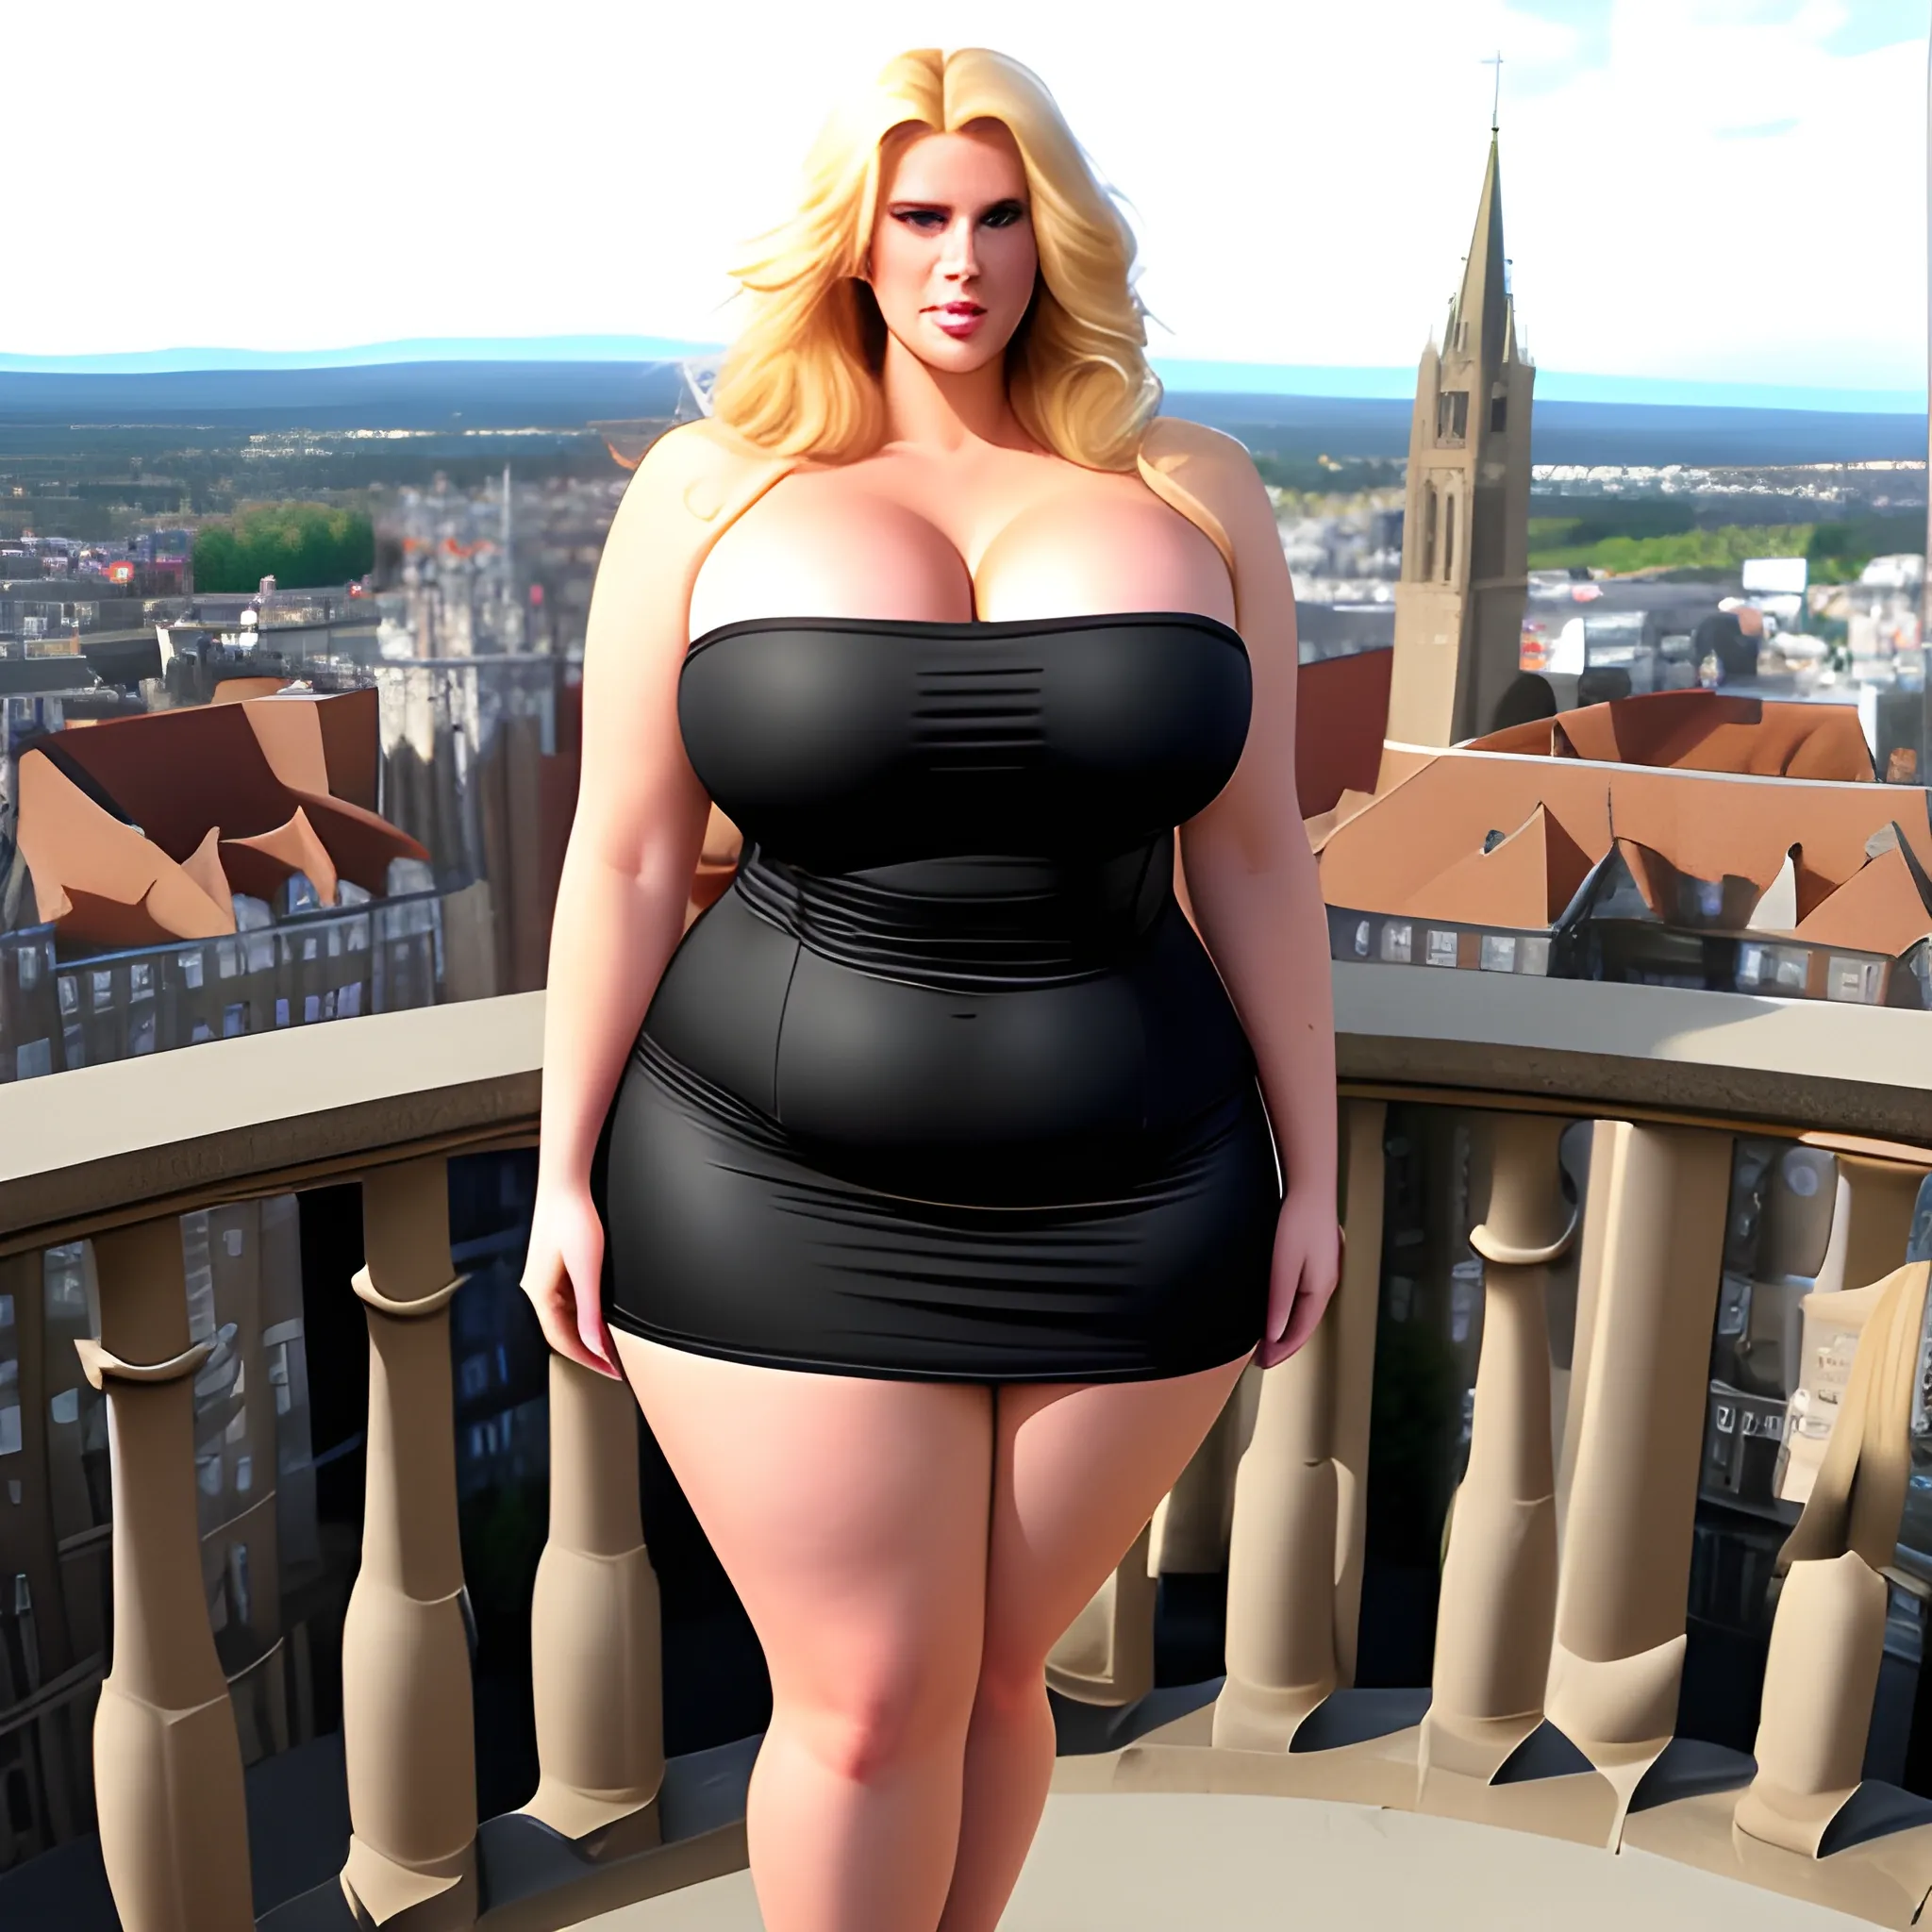 huge and very tall friendly blonde plus size girl with small head and broad shoulders, not curvy but massive, on busy schoolyard towerring among other students and teachers 